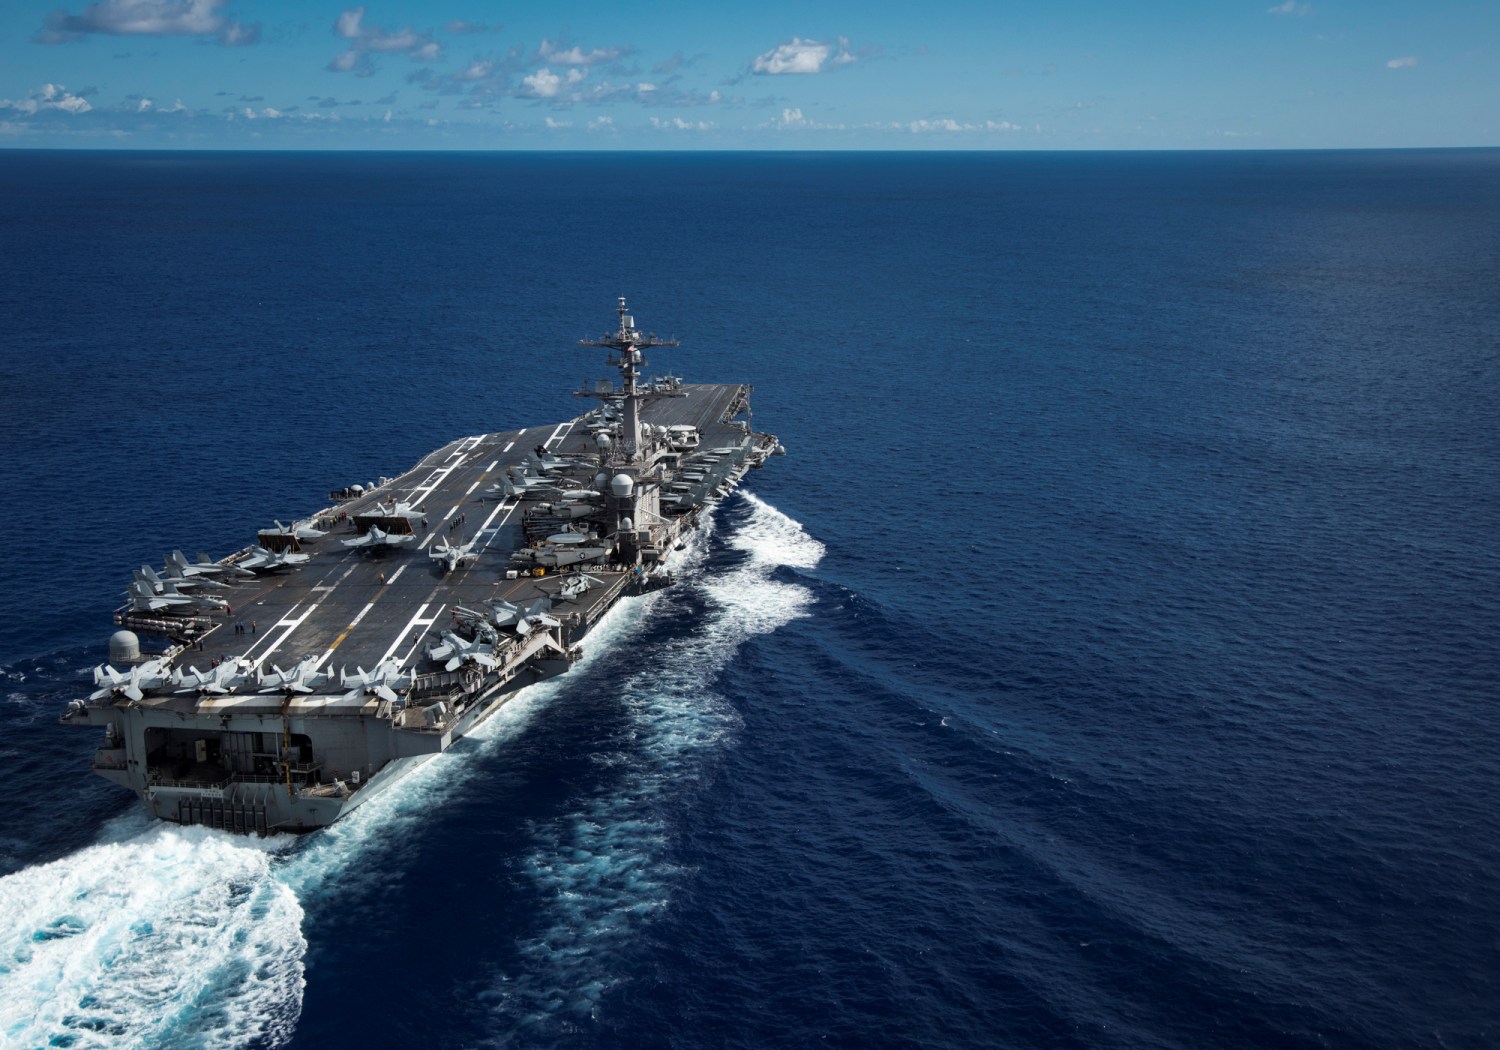 The Nimitz-class U.S. Navy aircraft carrier USS Carl Vinson transits the Philippine Sea while conducting a bilateral exercise with the Japan Maritime Self-Defense Force April 23, 2017. Picture taken April 23, 2017. U.S. Navy/Mass Communication Specialist 2nd Class Z.A. Landers/Handout via REUTERSTHIS IMAGE HAS BEEN SUPPLIED BY A THIRD PARTY. IT IS DISTRIBUTED, EXACTLY AS RECEIVED BY REUTERS, AS A SERVICE TO CLIENTSFOR EDITORIAL USE ONLY. NOT FOR SALE FOR MARKETING OR ADVERTISING CAMPAIGNS - RTS14738